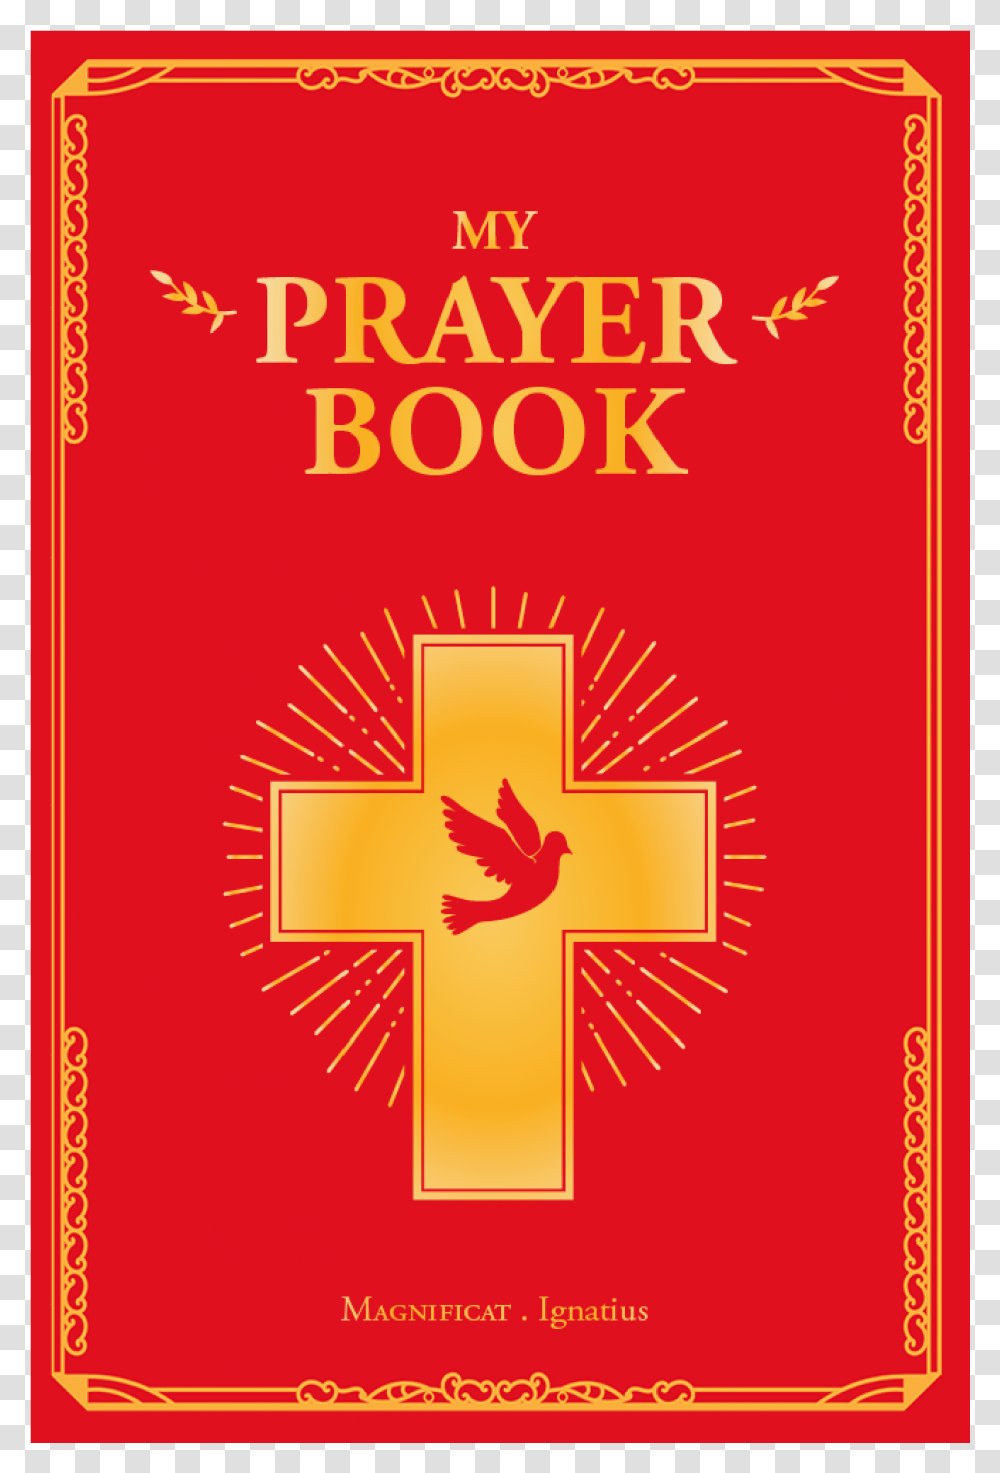 Catholic Prayer Book Cover, Poster, Advertisement, First Aid, Flyer Transparent Png